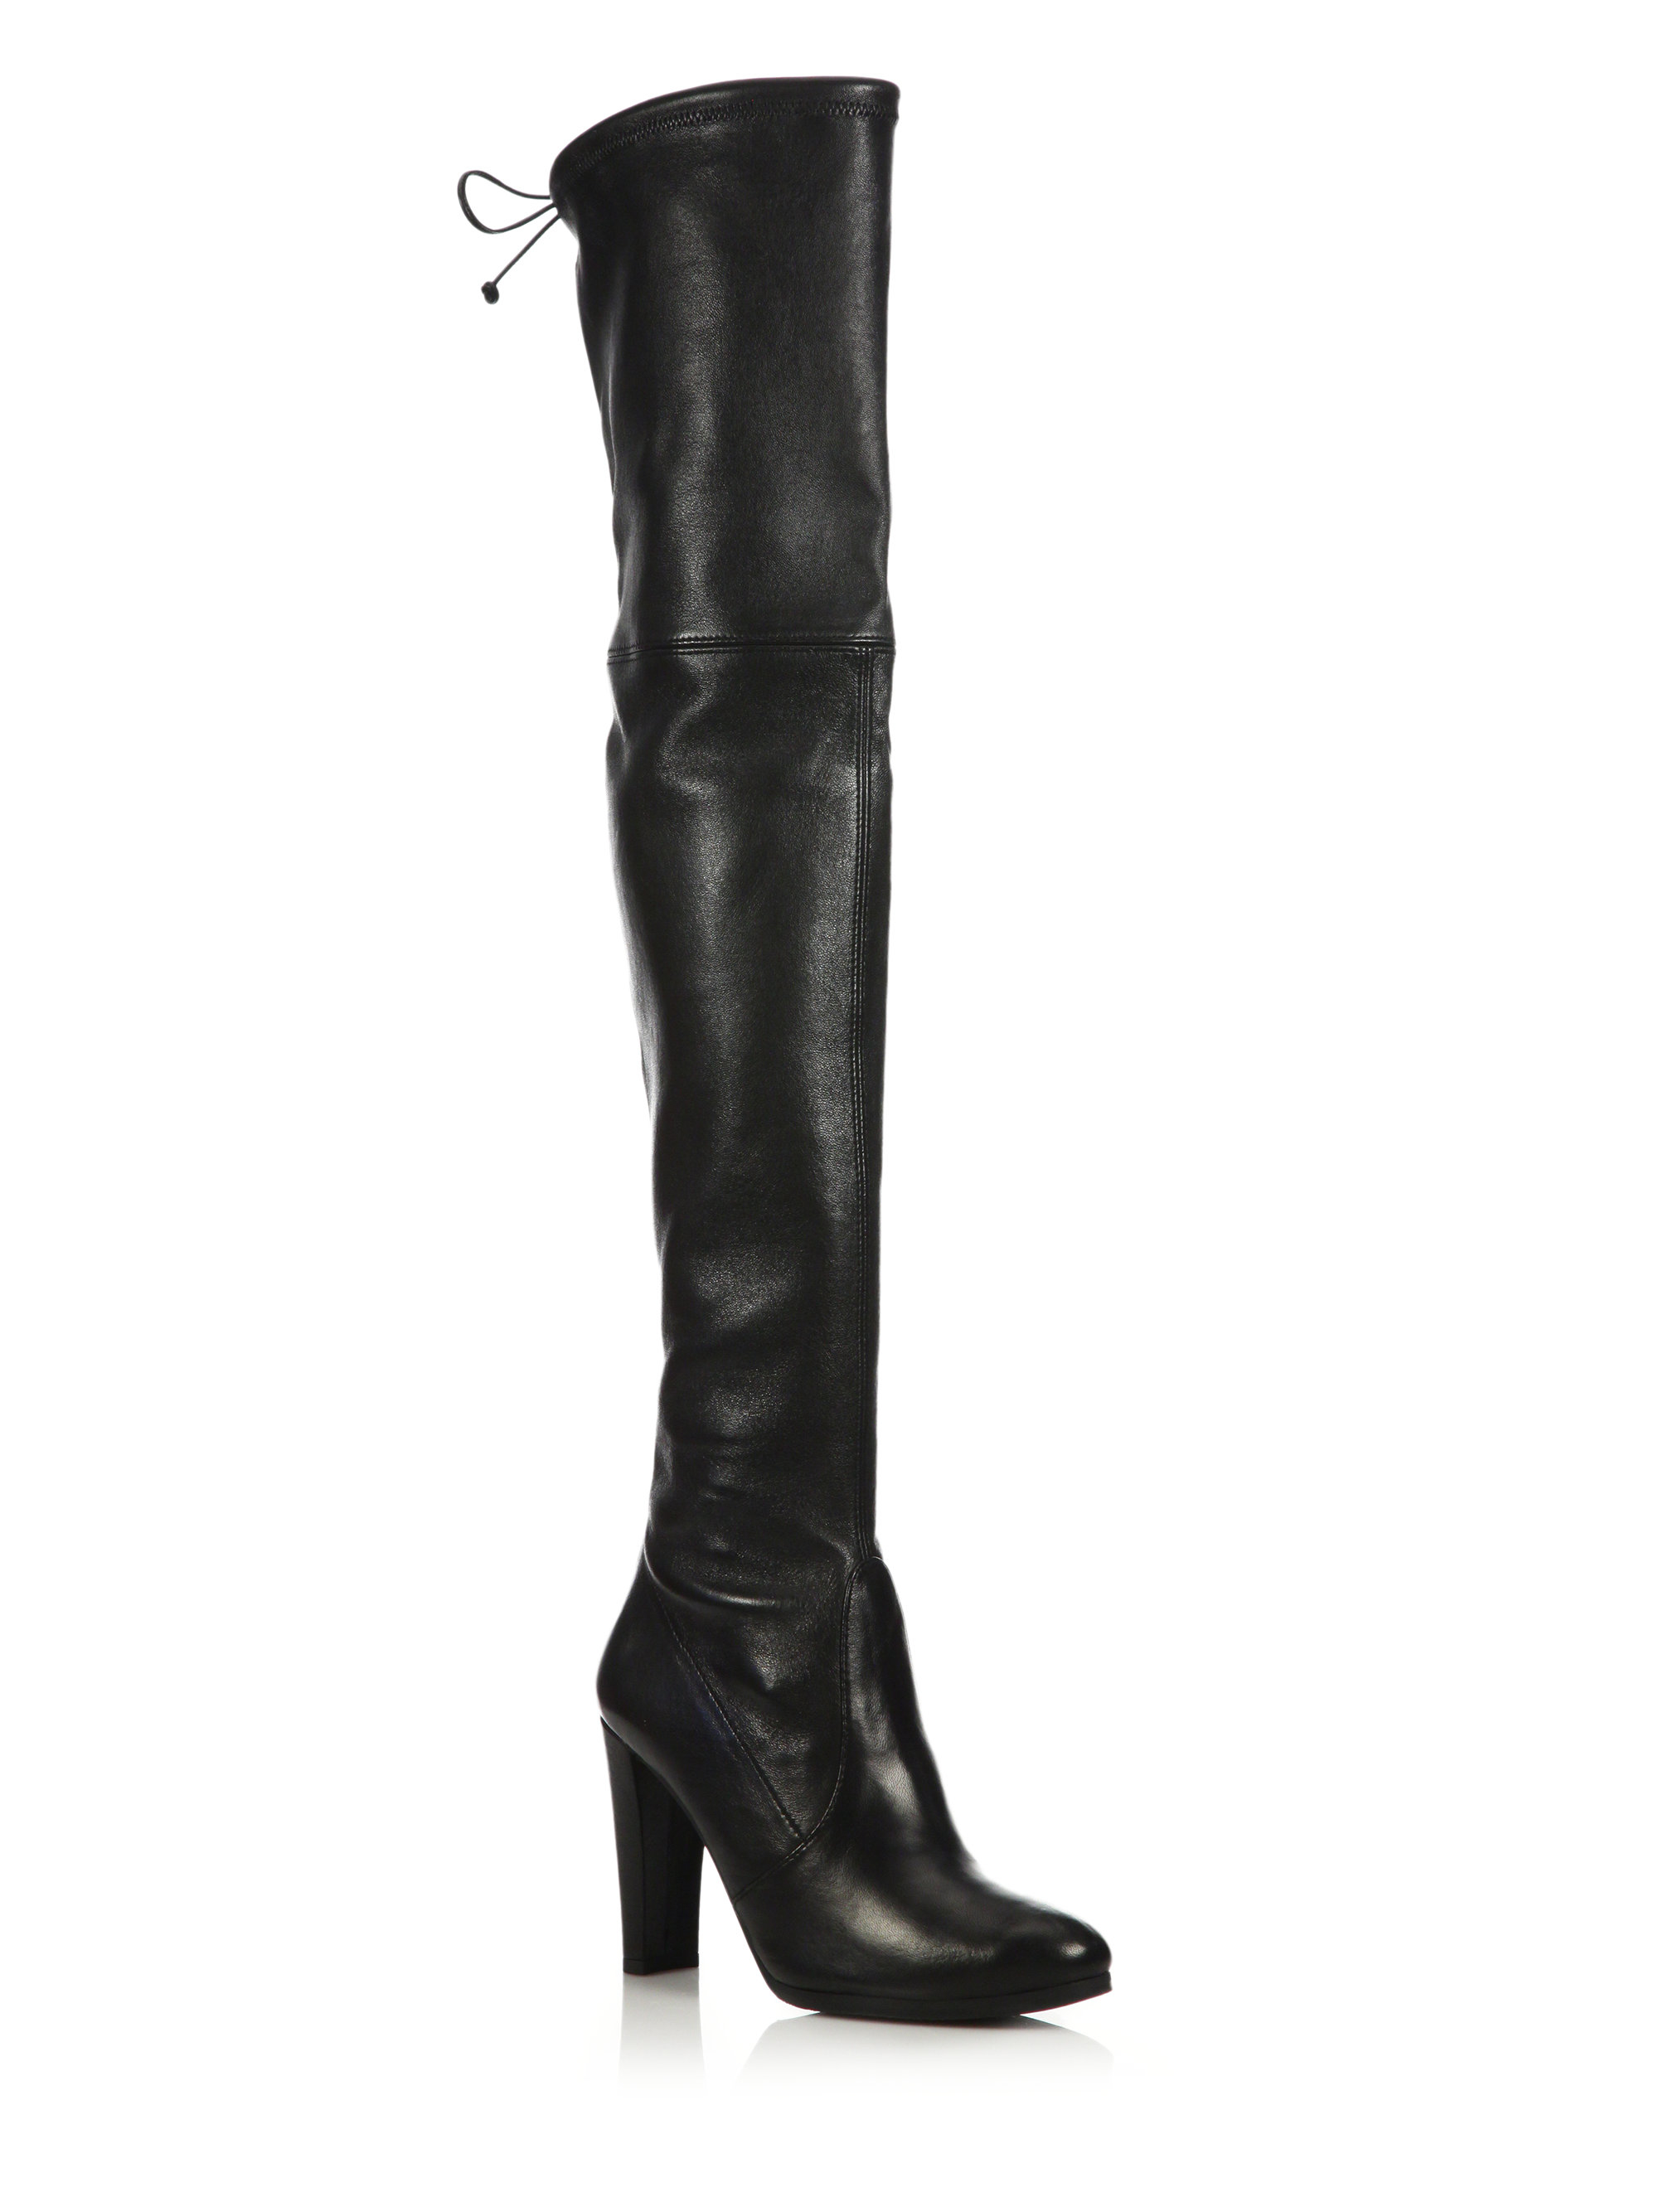 Stuart weitzman Highland Leather Over-The-Knee Boots in Black | Lyst